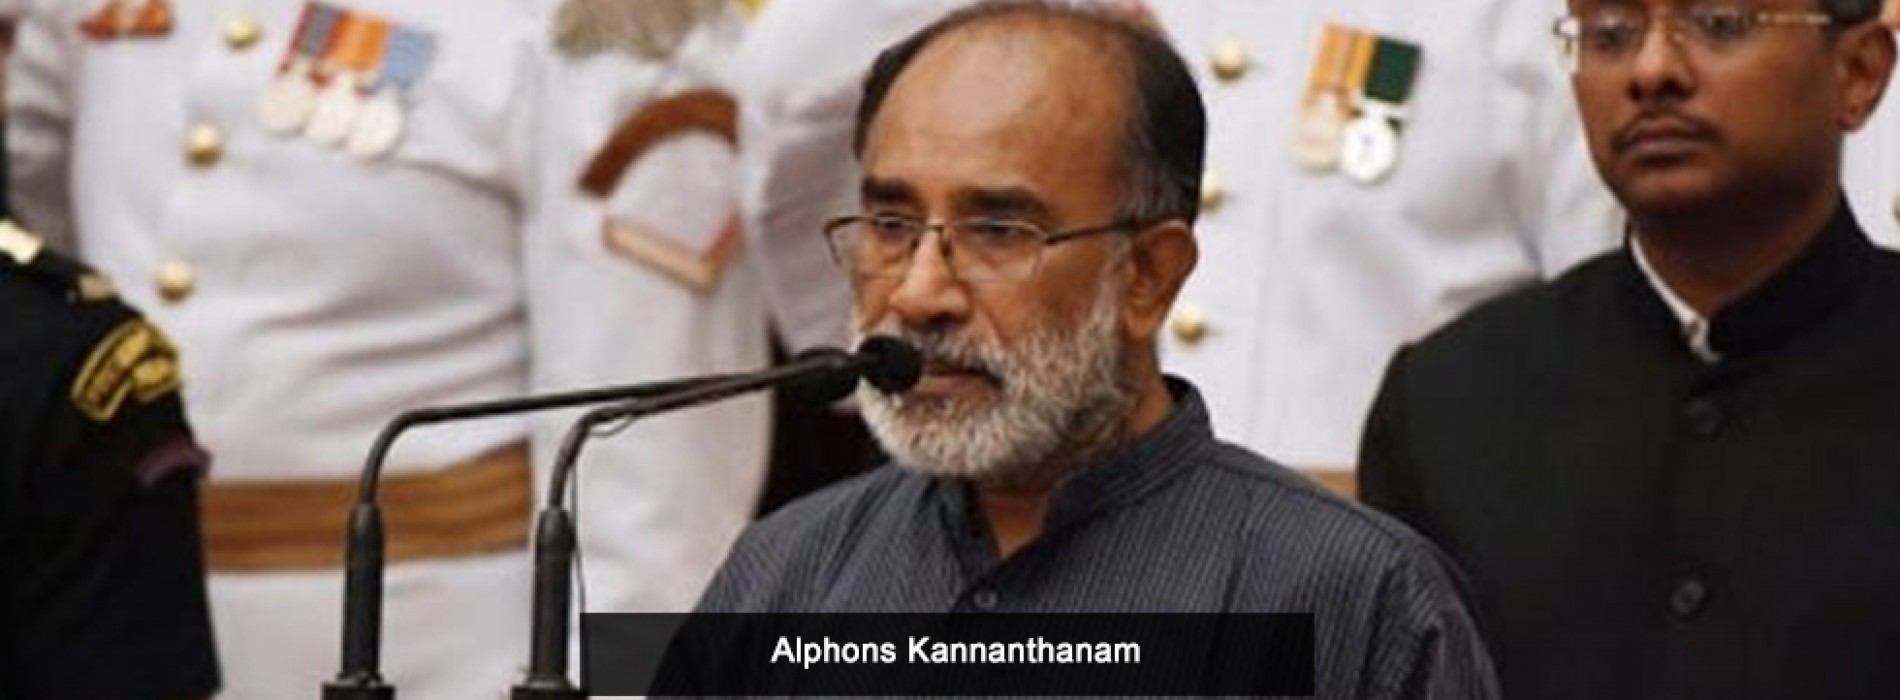 Alphons Kannanthanam appointed as the new Minister of State (I/C) for Tourism